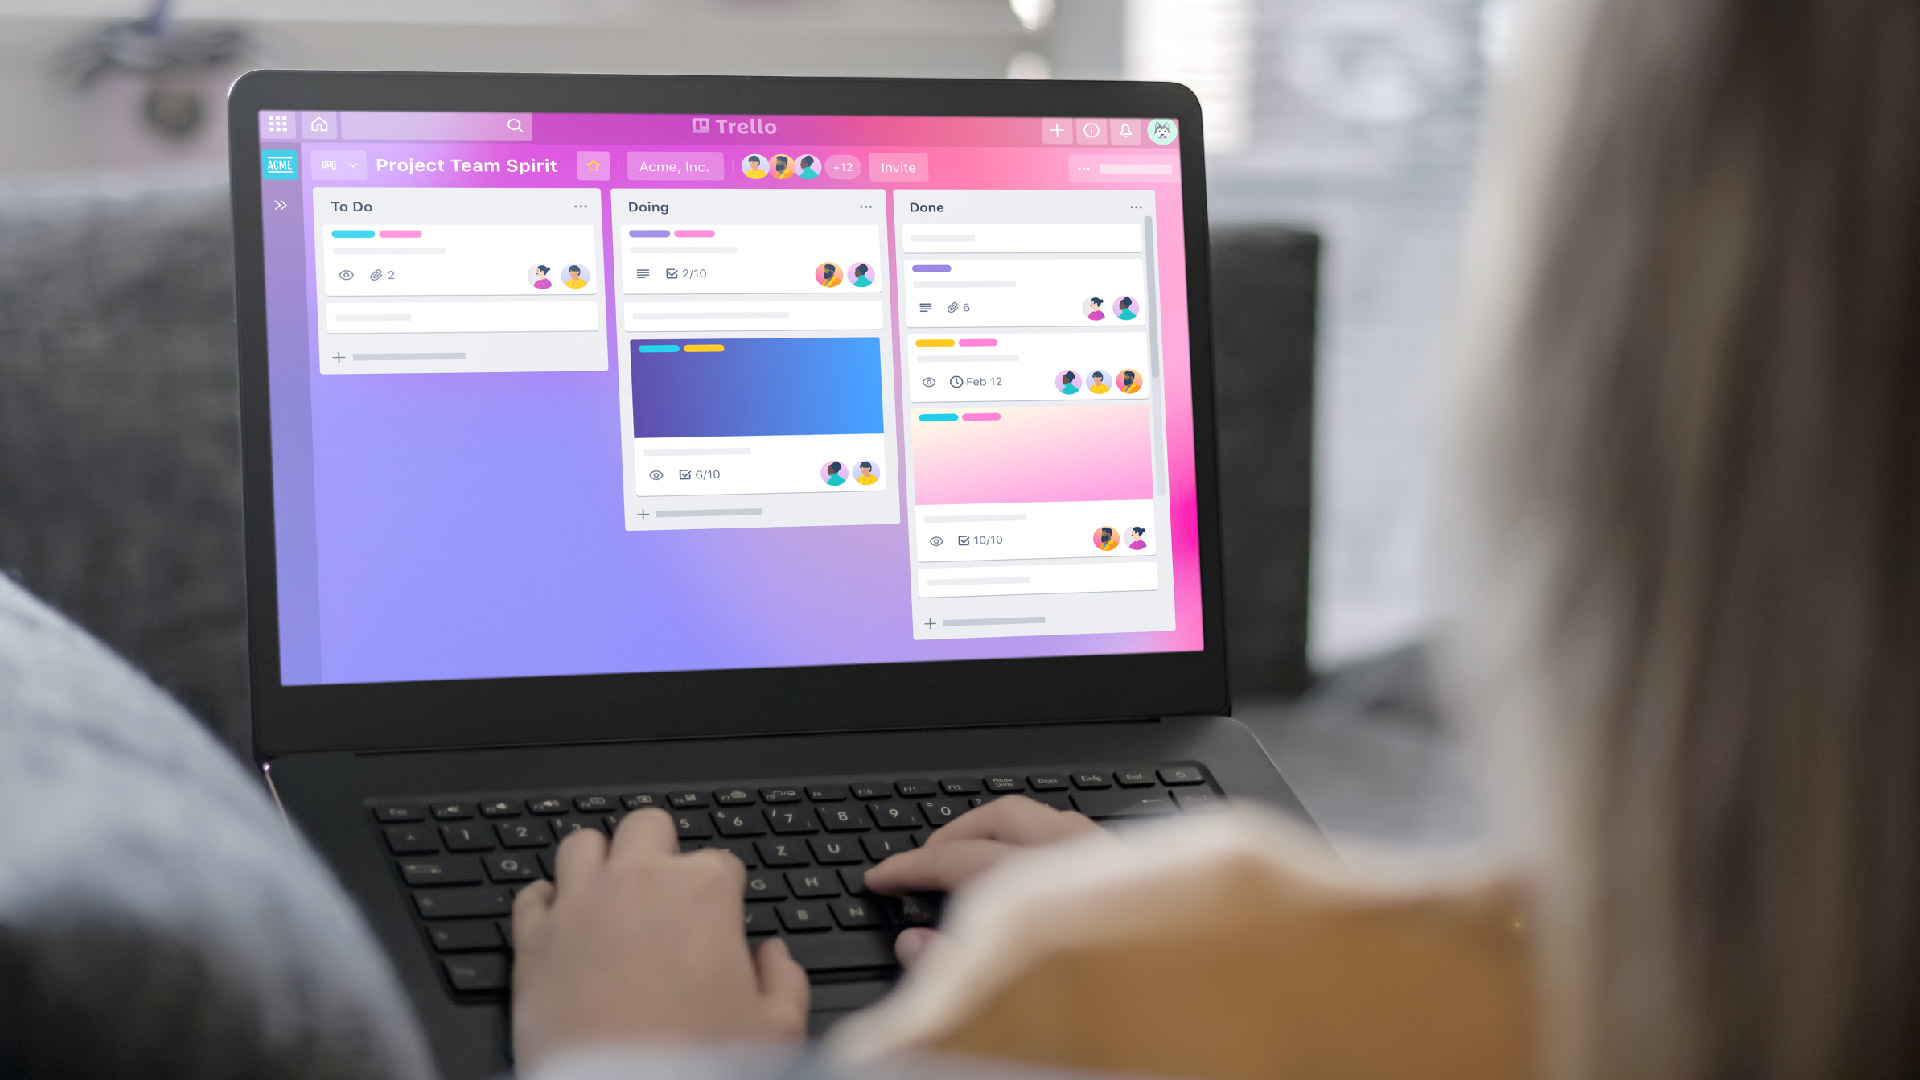 Use Trello as an eLearning project management tool.